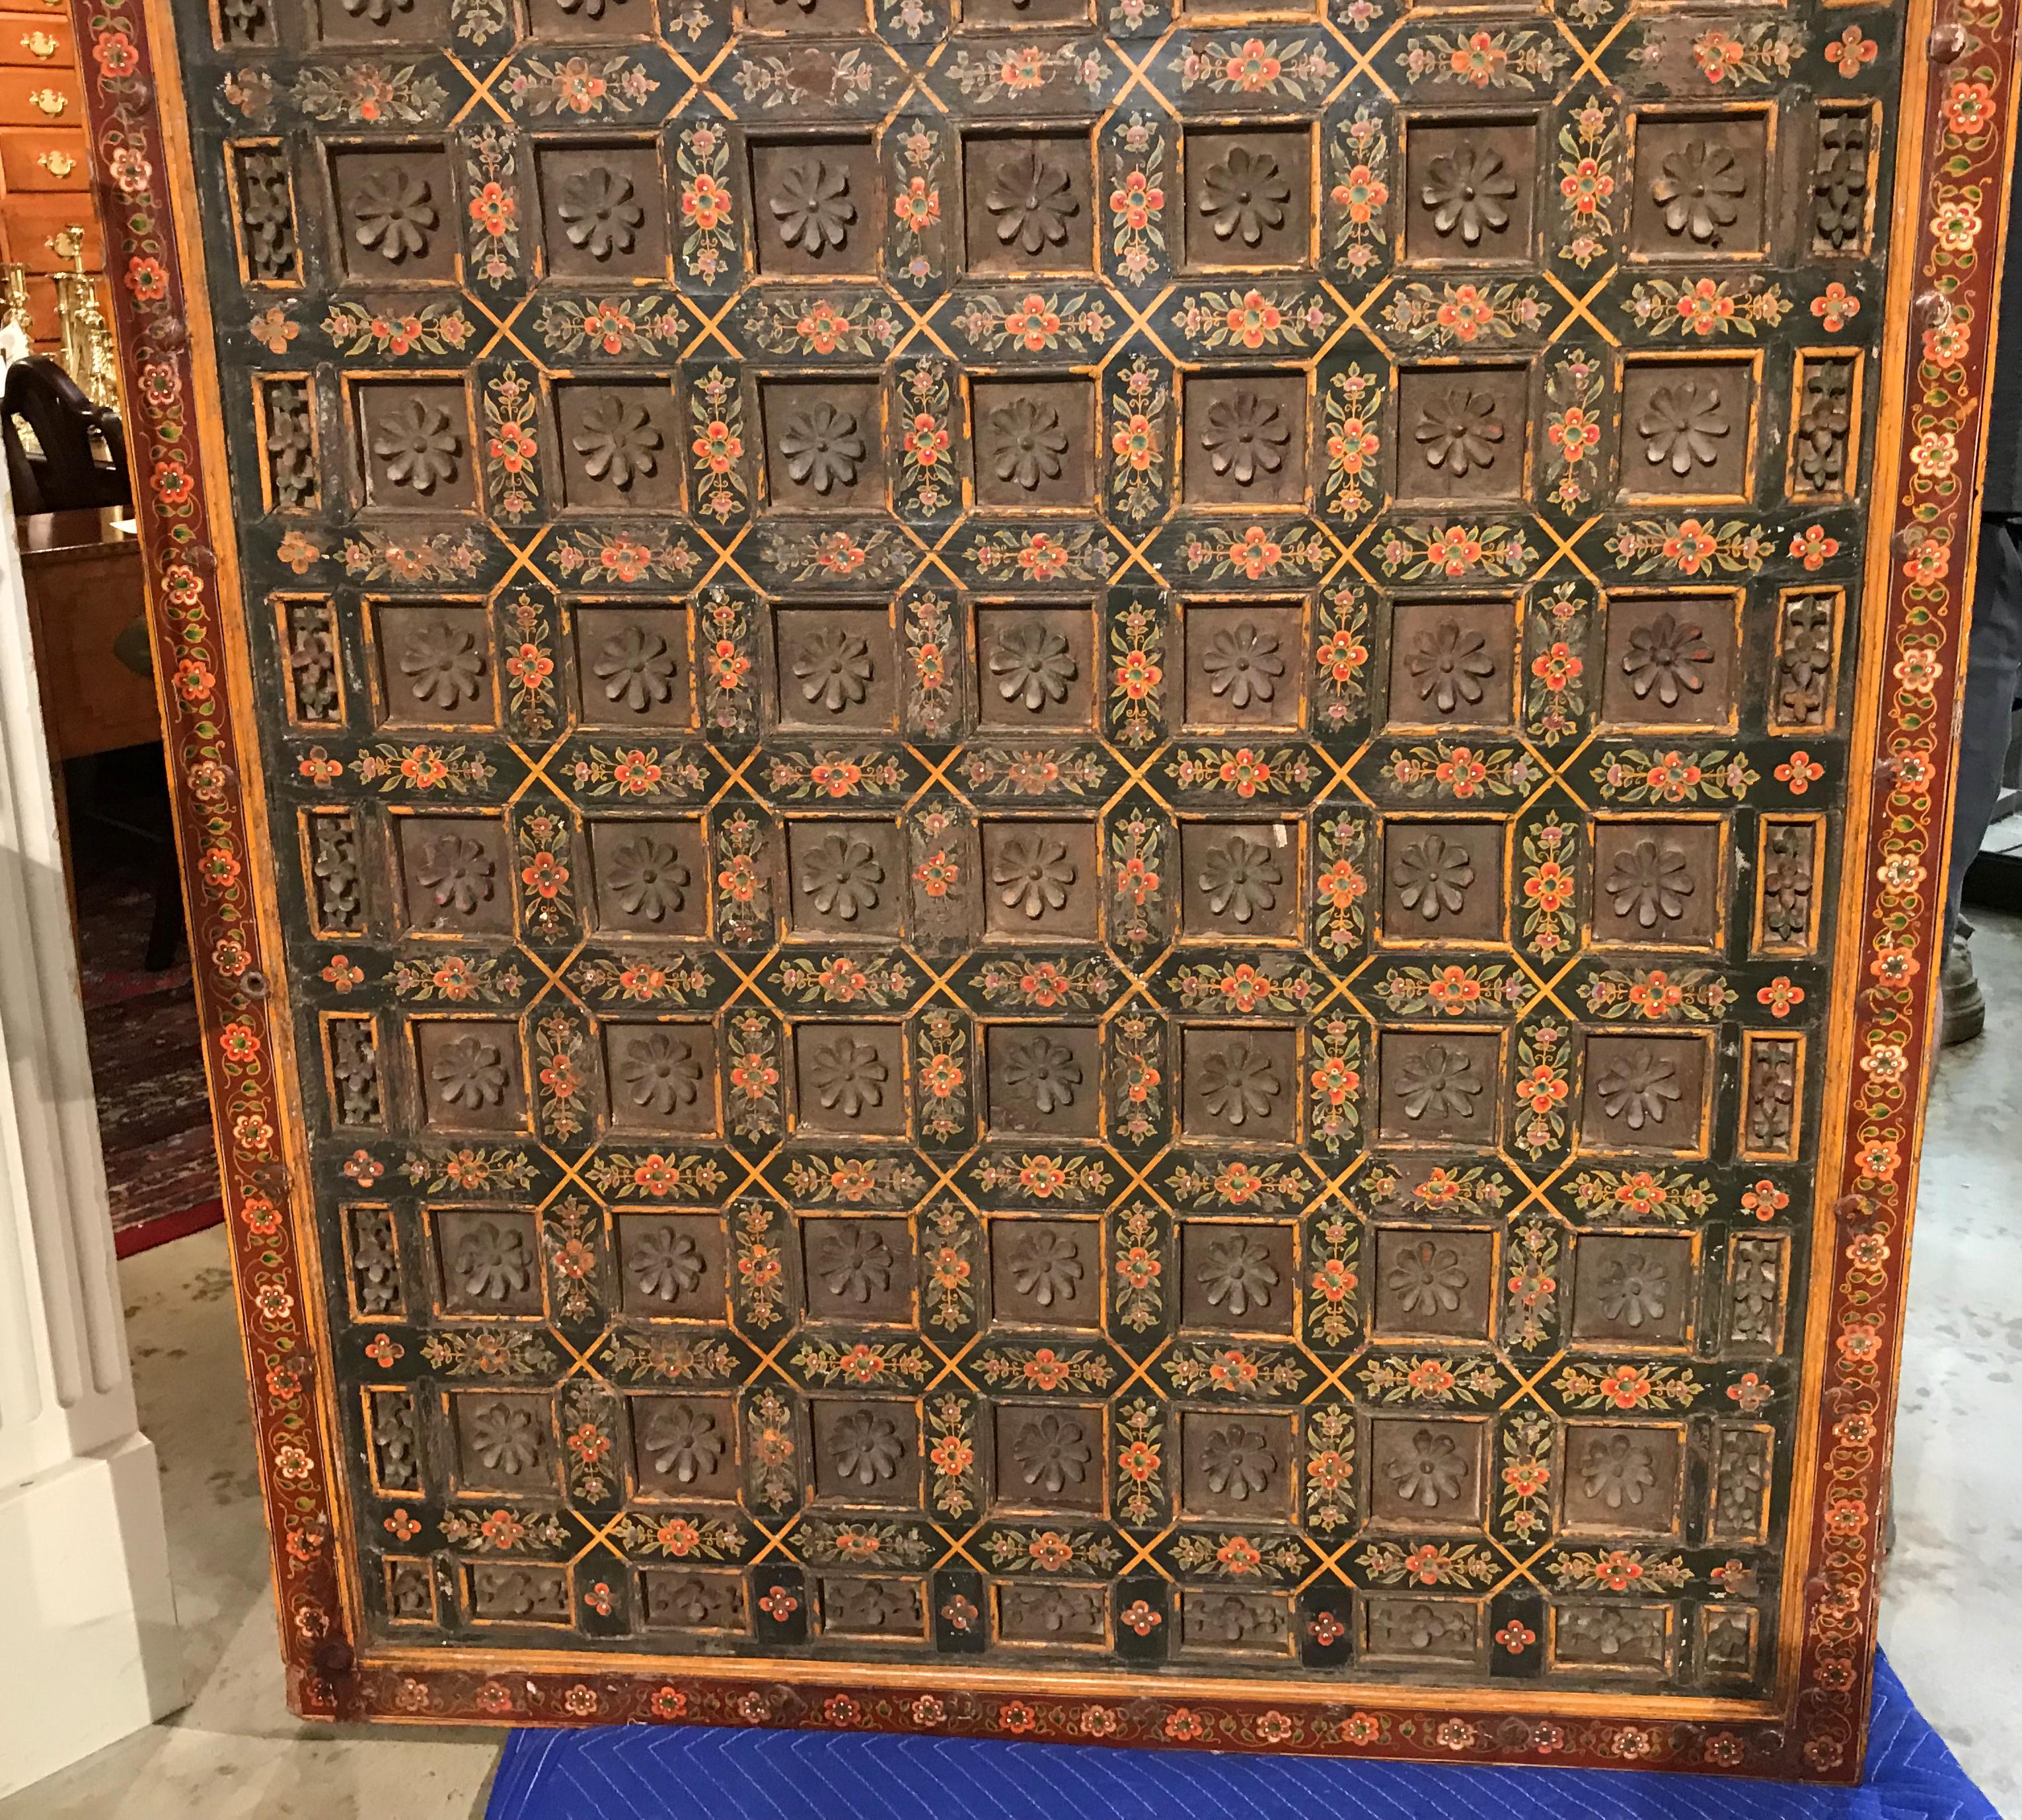 Hand-Carved Indian Polychrome Carved Architectural Ceiling Panel with Lotus Blossoms